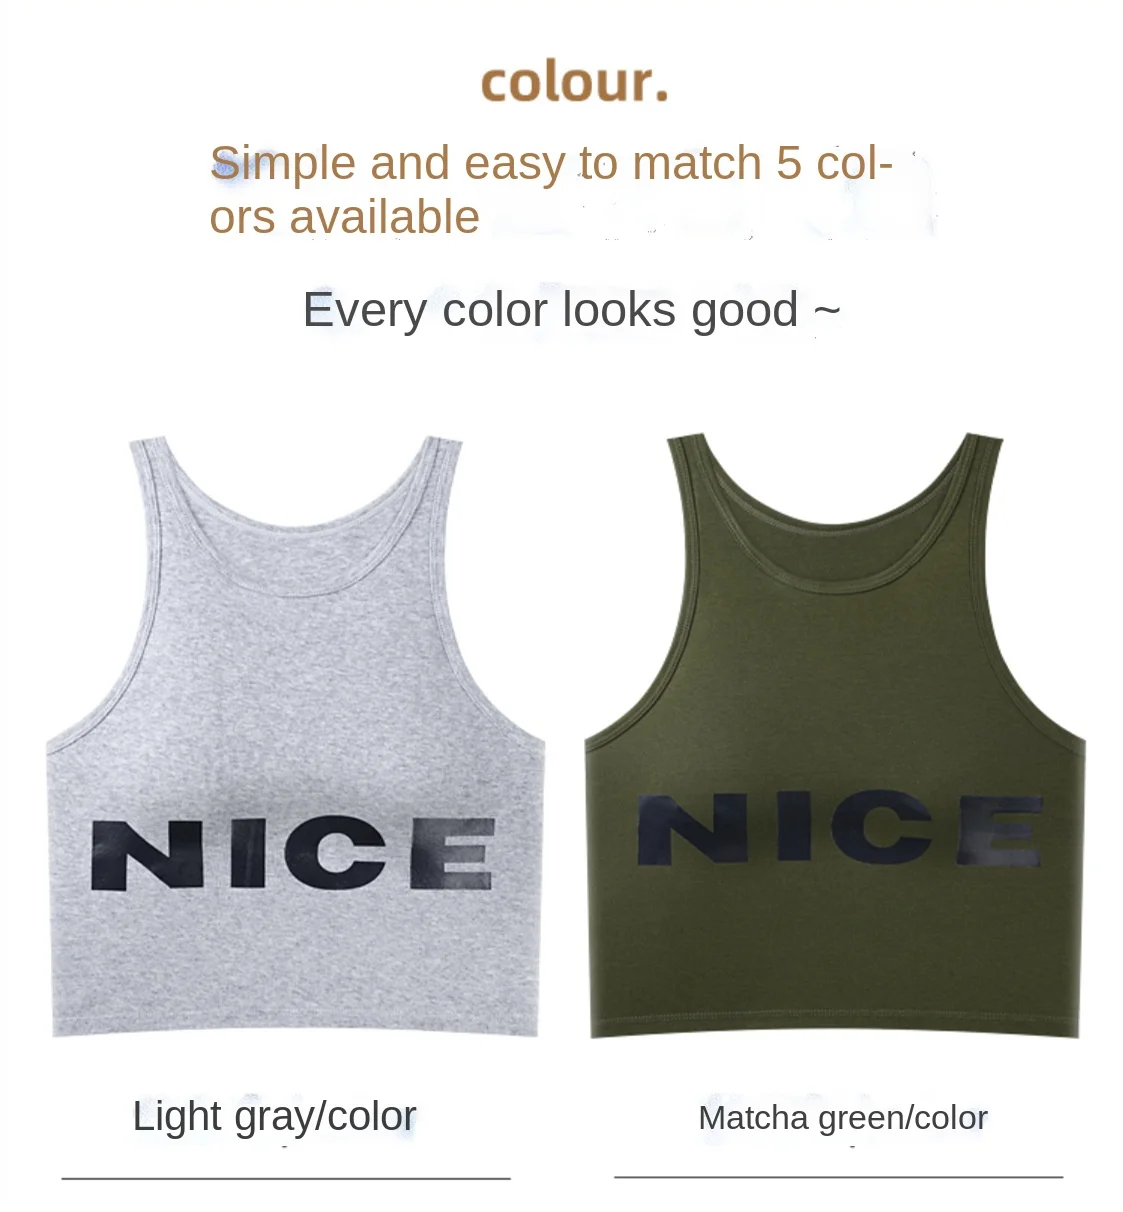 2022 Women's Underwear Female Crop Tops Fashion Printed Tank Up Cotton Woman V-Neck Sling New Spring And Summer Lingerie jockey camisole